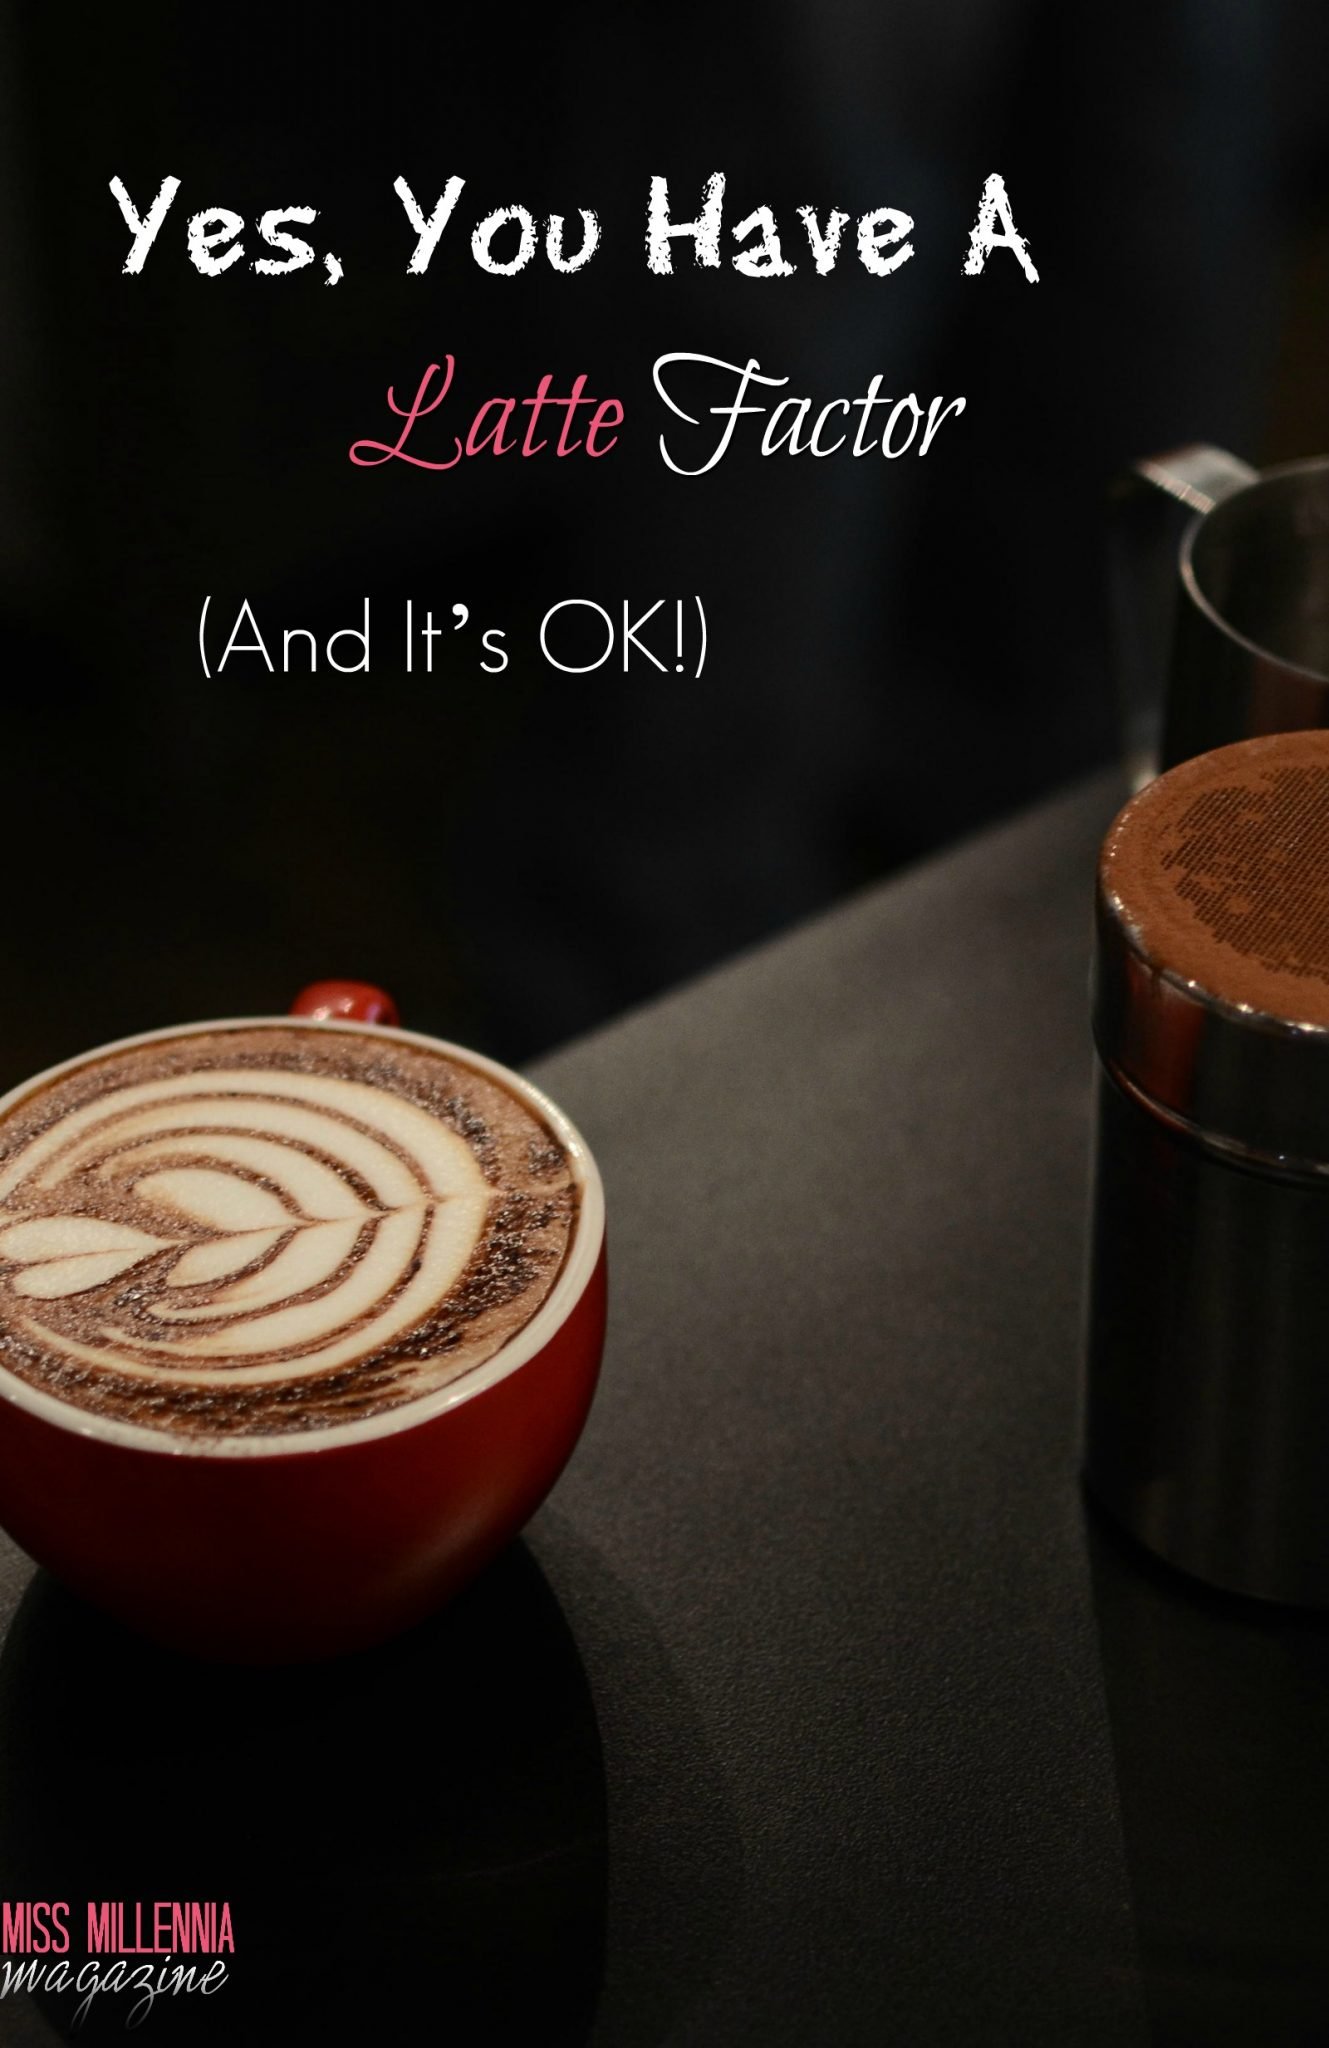 Yes, You Have A Latte Factor (And It’s OK!)